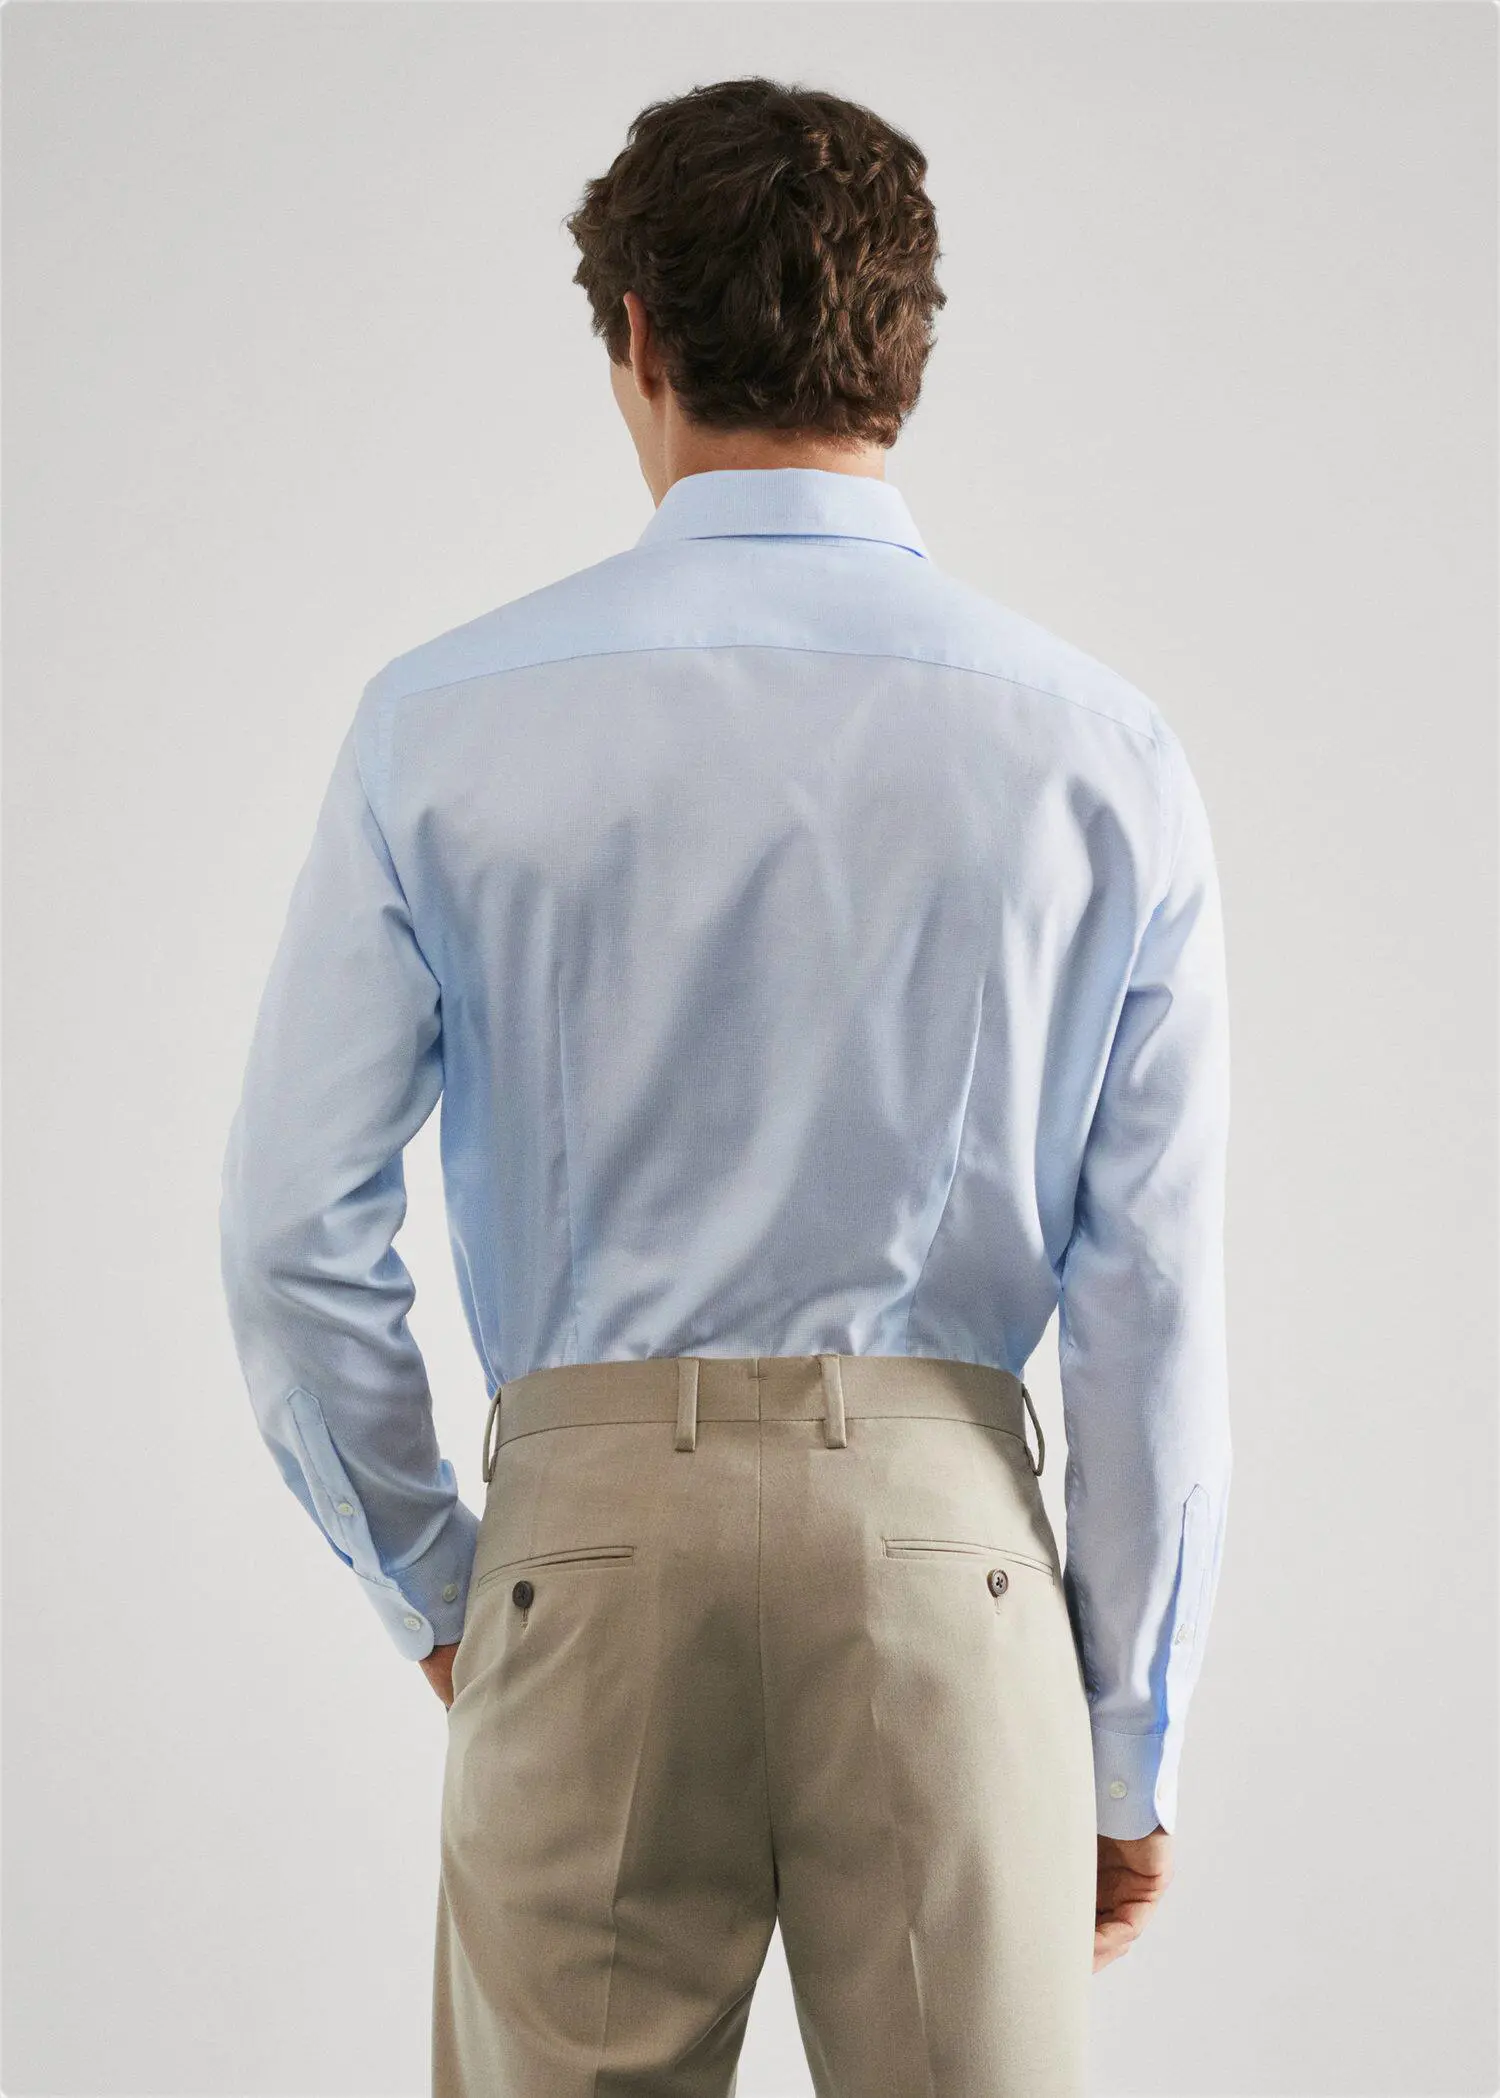 Mango Slim fit structured suit shirt. a man in a blue shirt and tan pants. 